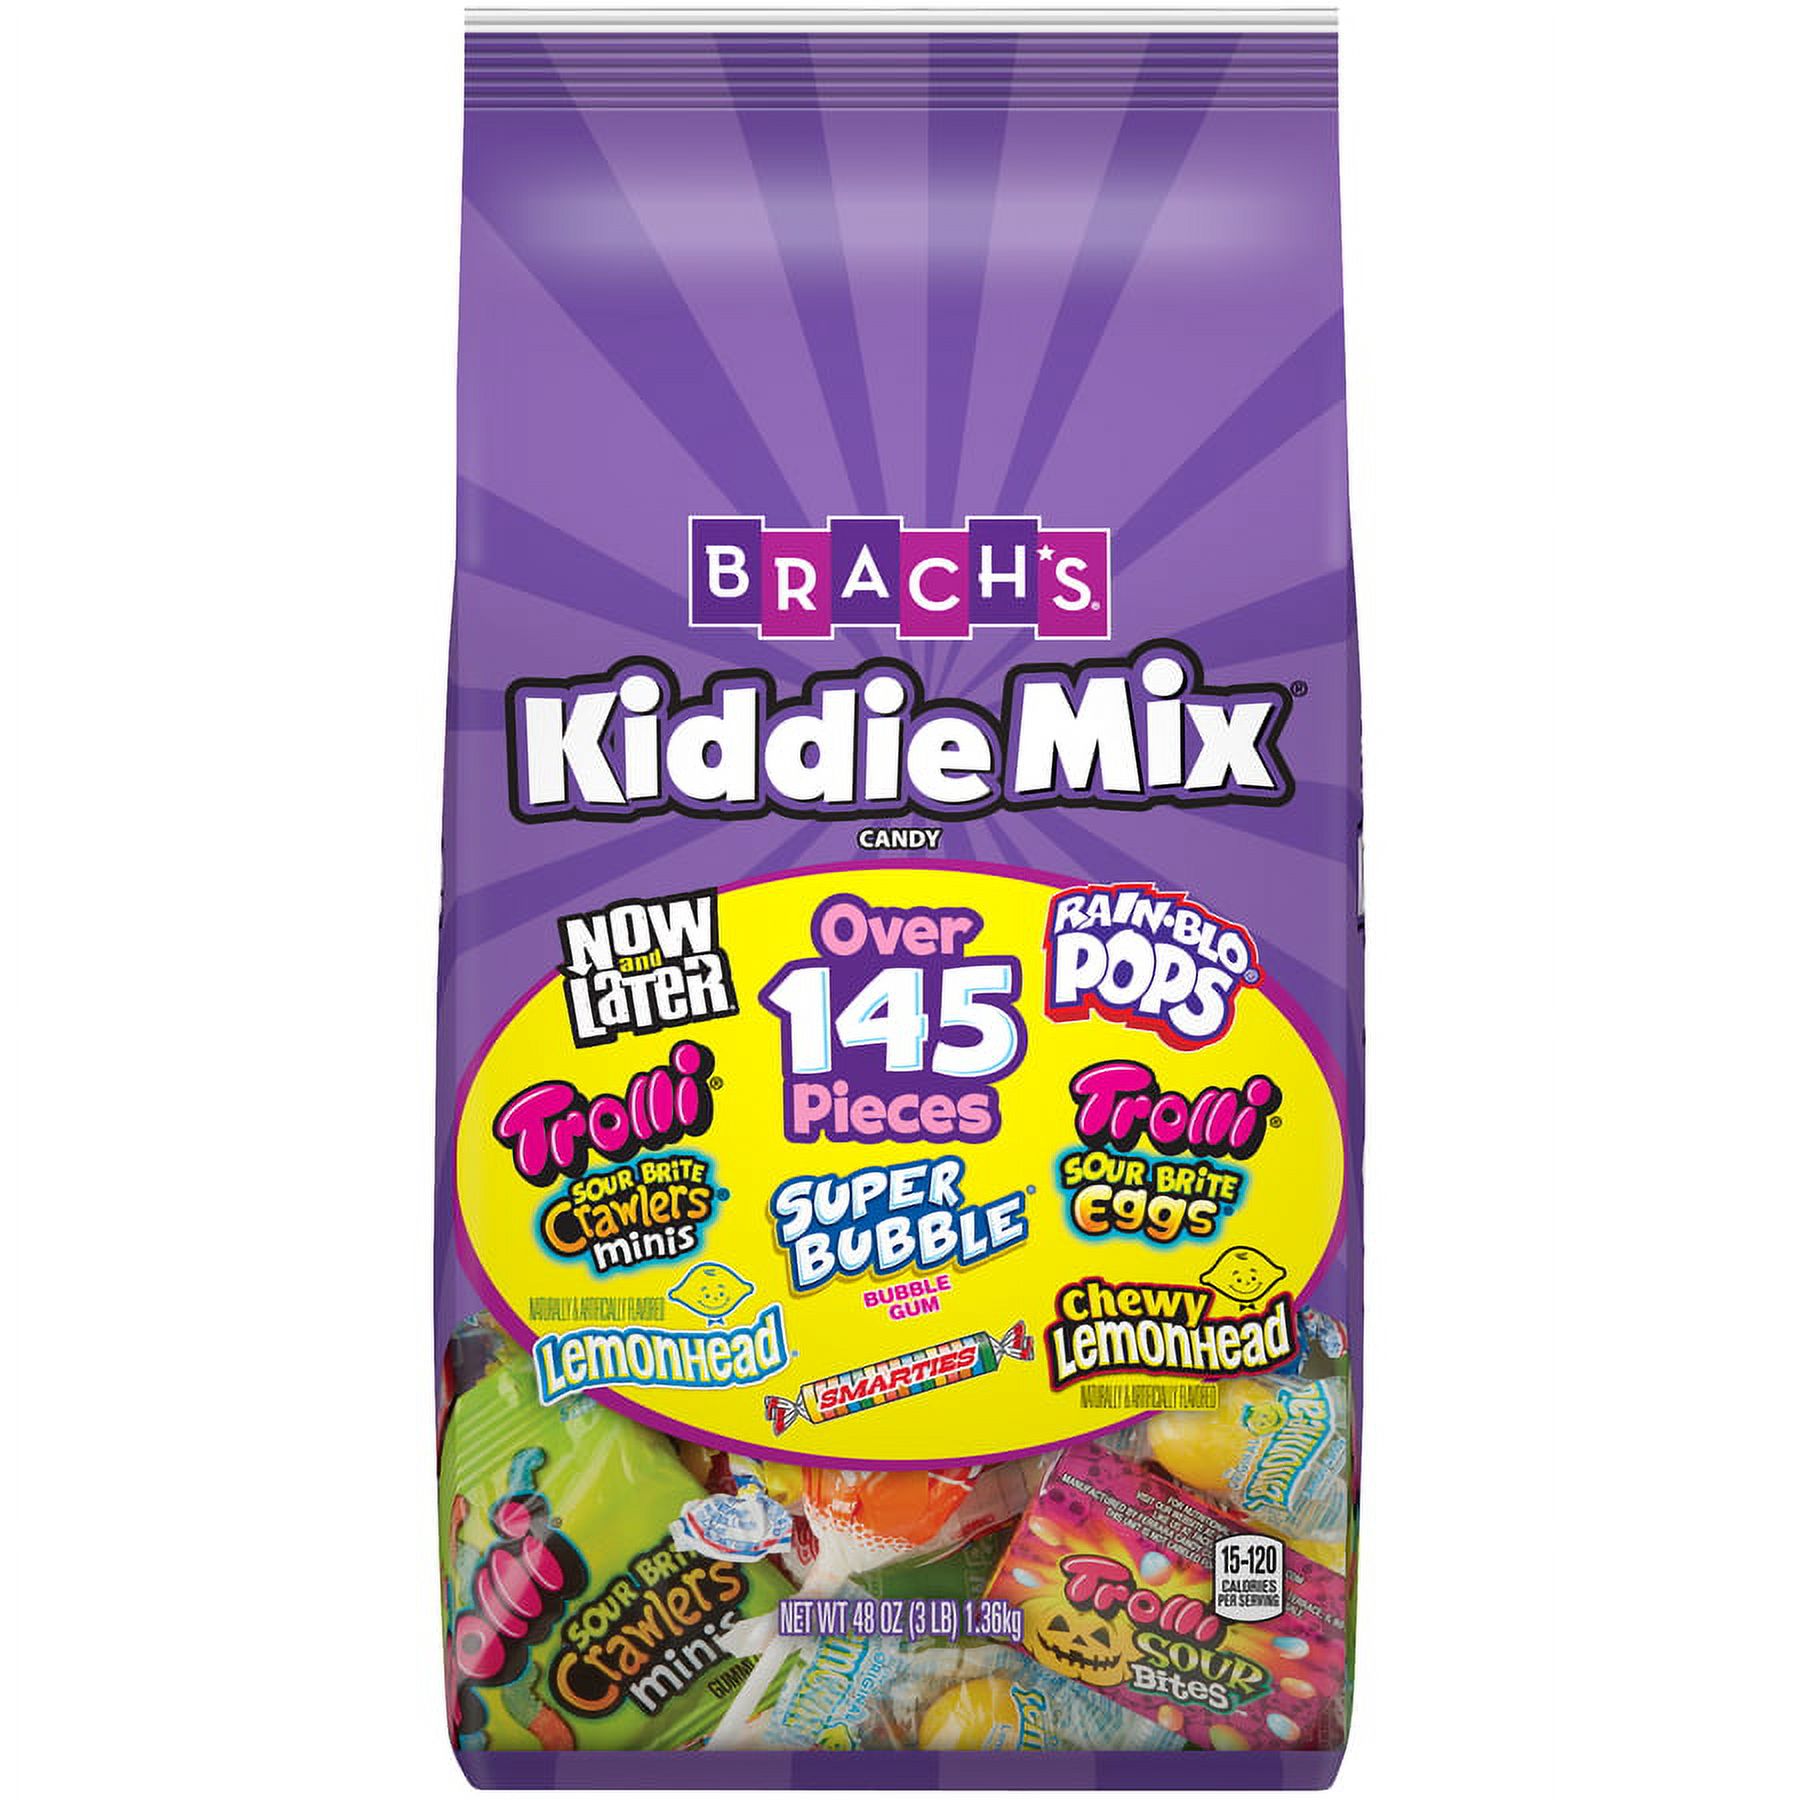 Brach's Kiddie Assorted Candy Bag, 48 Oz (145 Pieces) - image 1 of 5